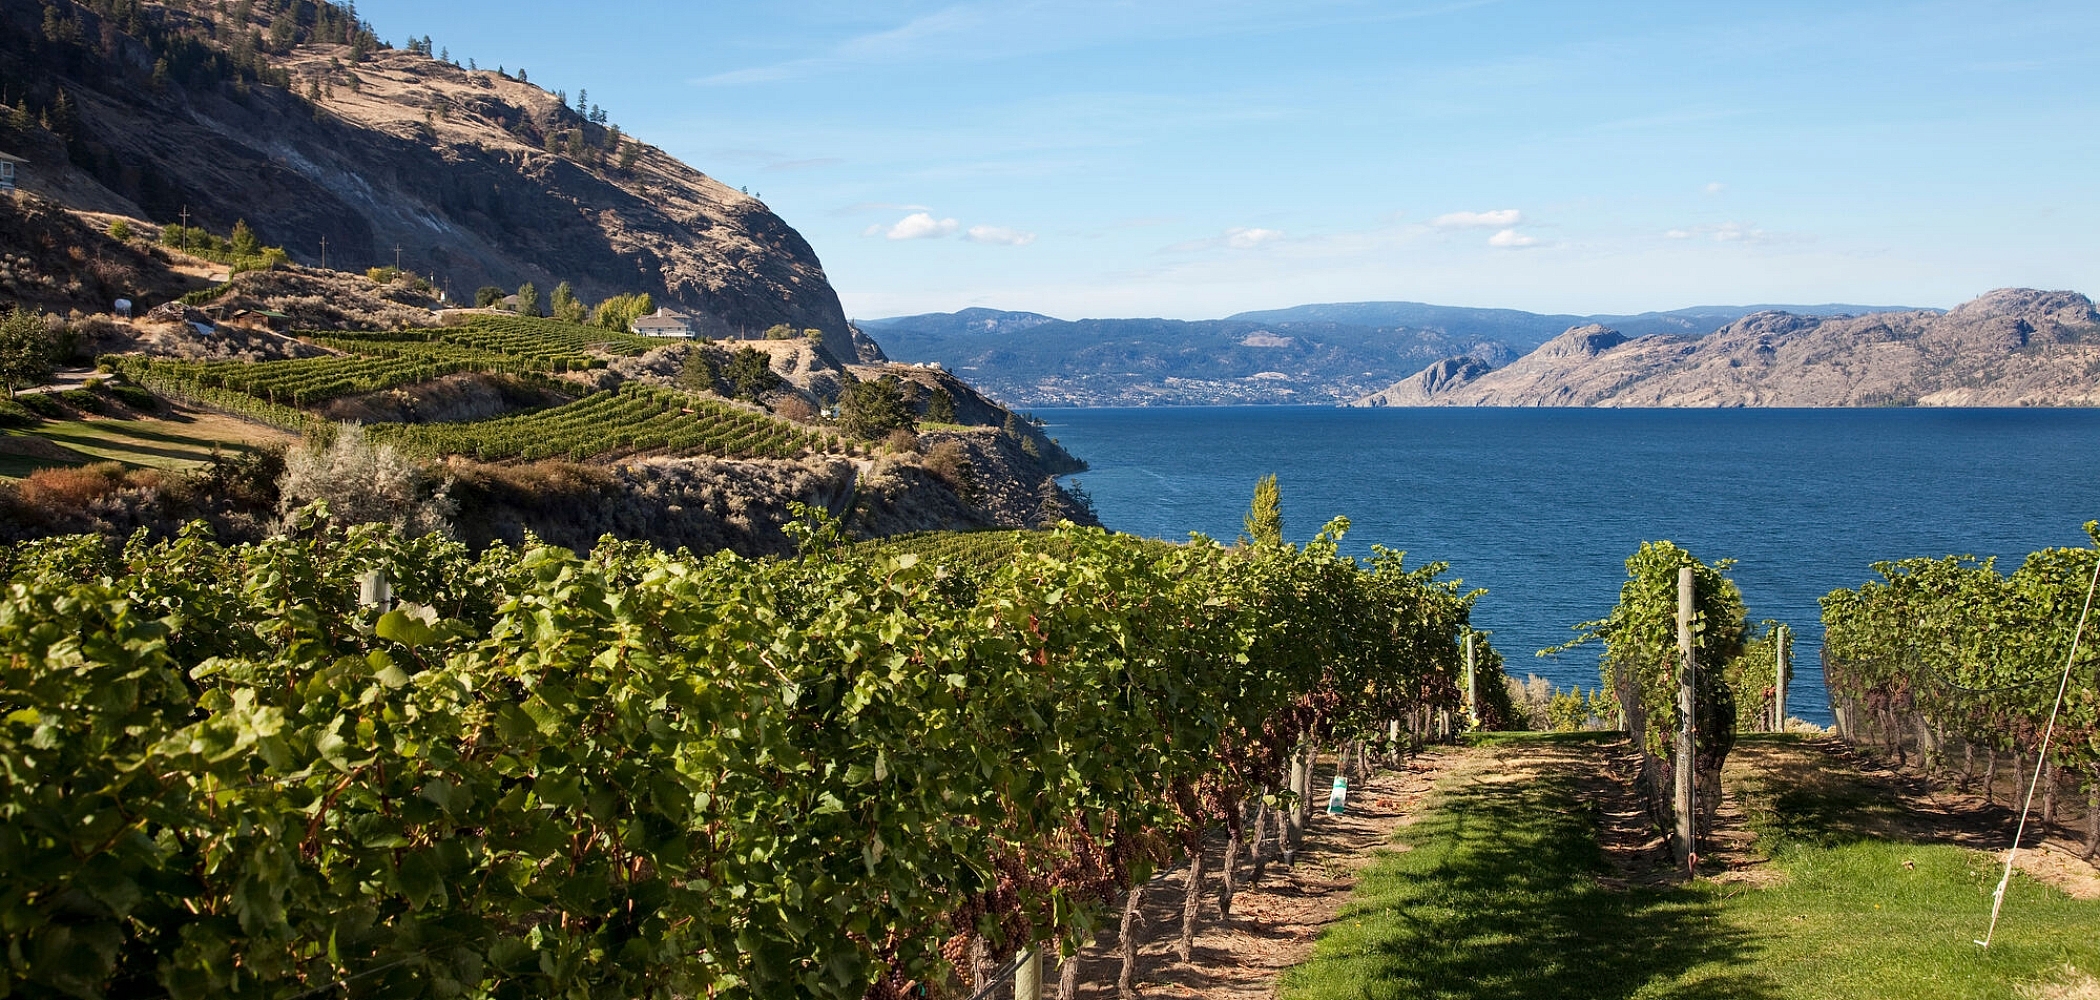 View between rows of grapes at a vineyard overlooking the blue water of Okanagan Lake. A hill is visible on the left side of the frame, and in the distance on the other side of the large lake.